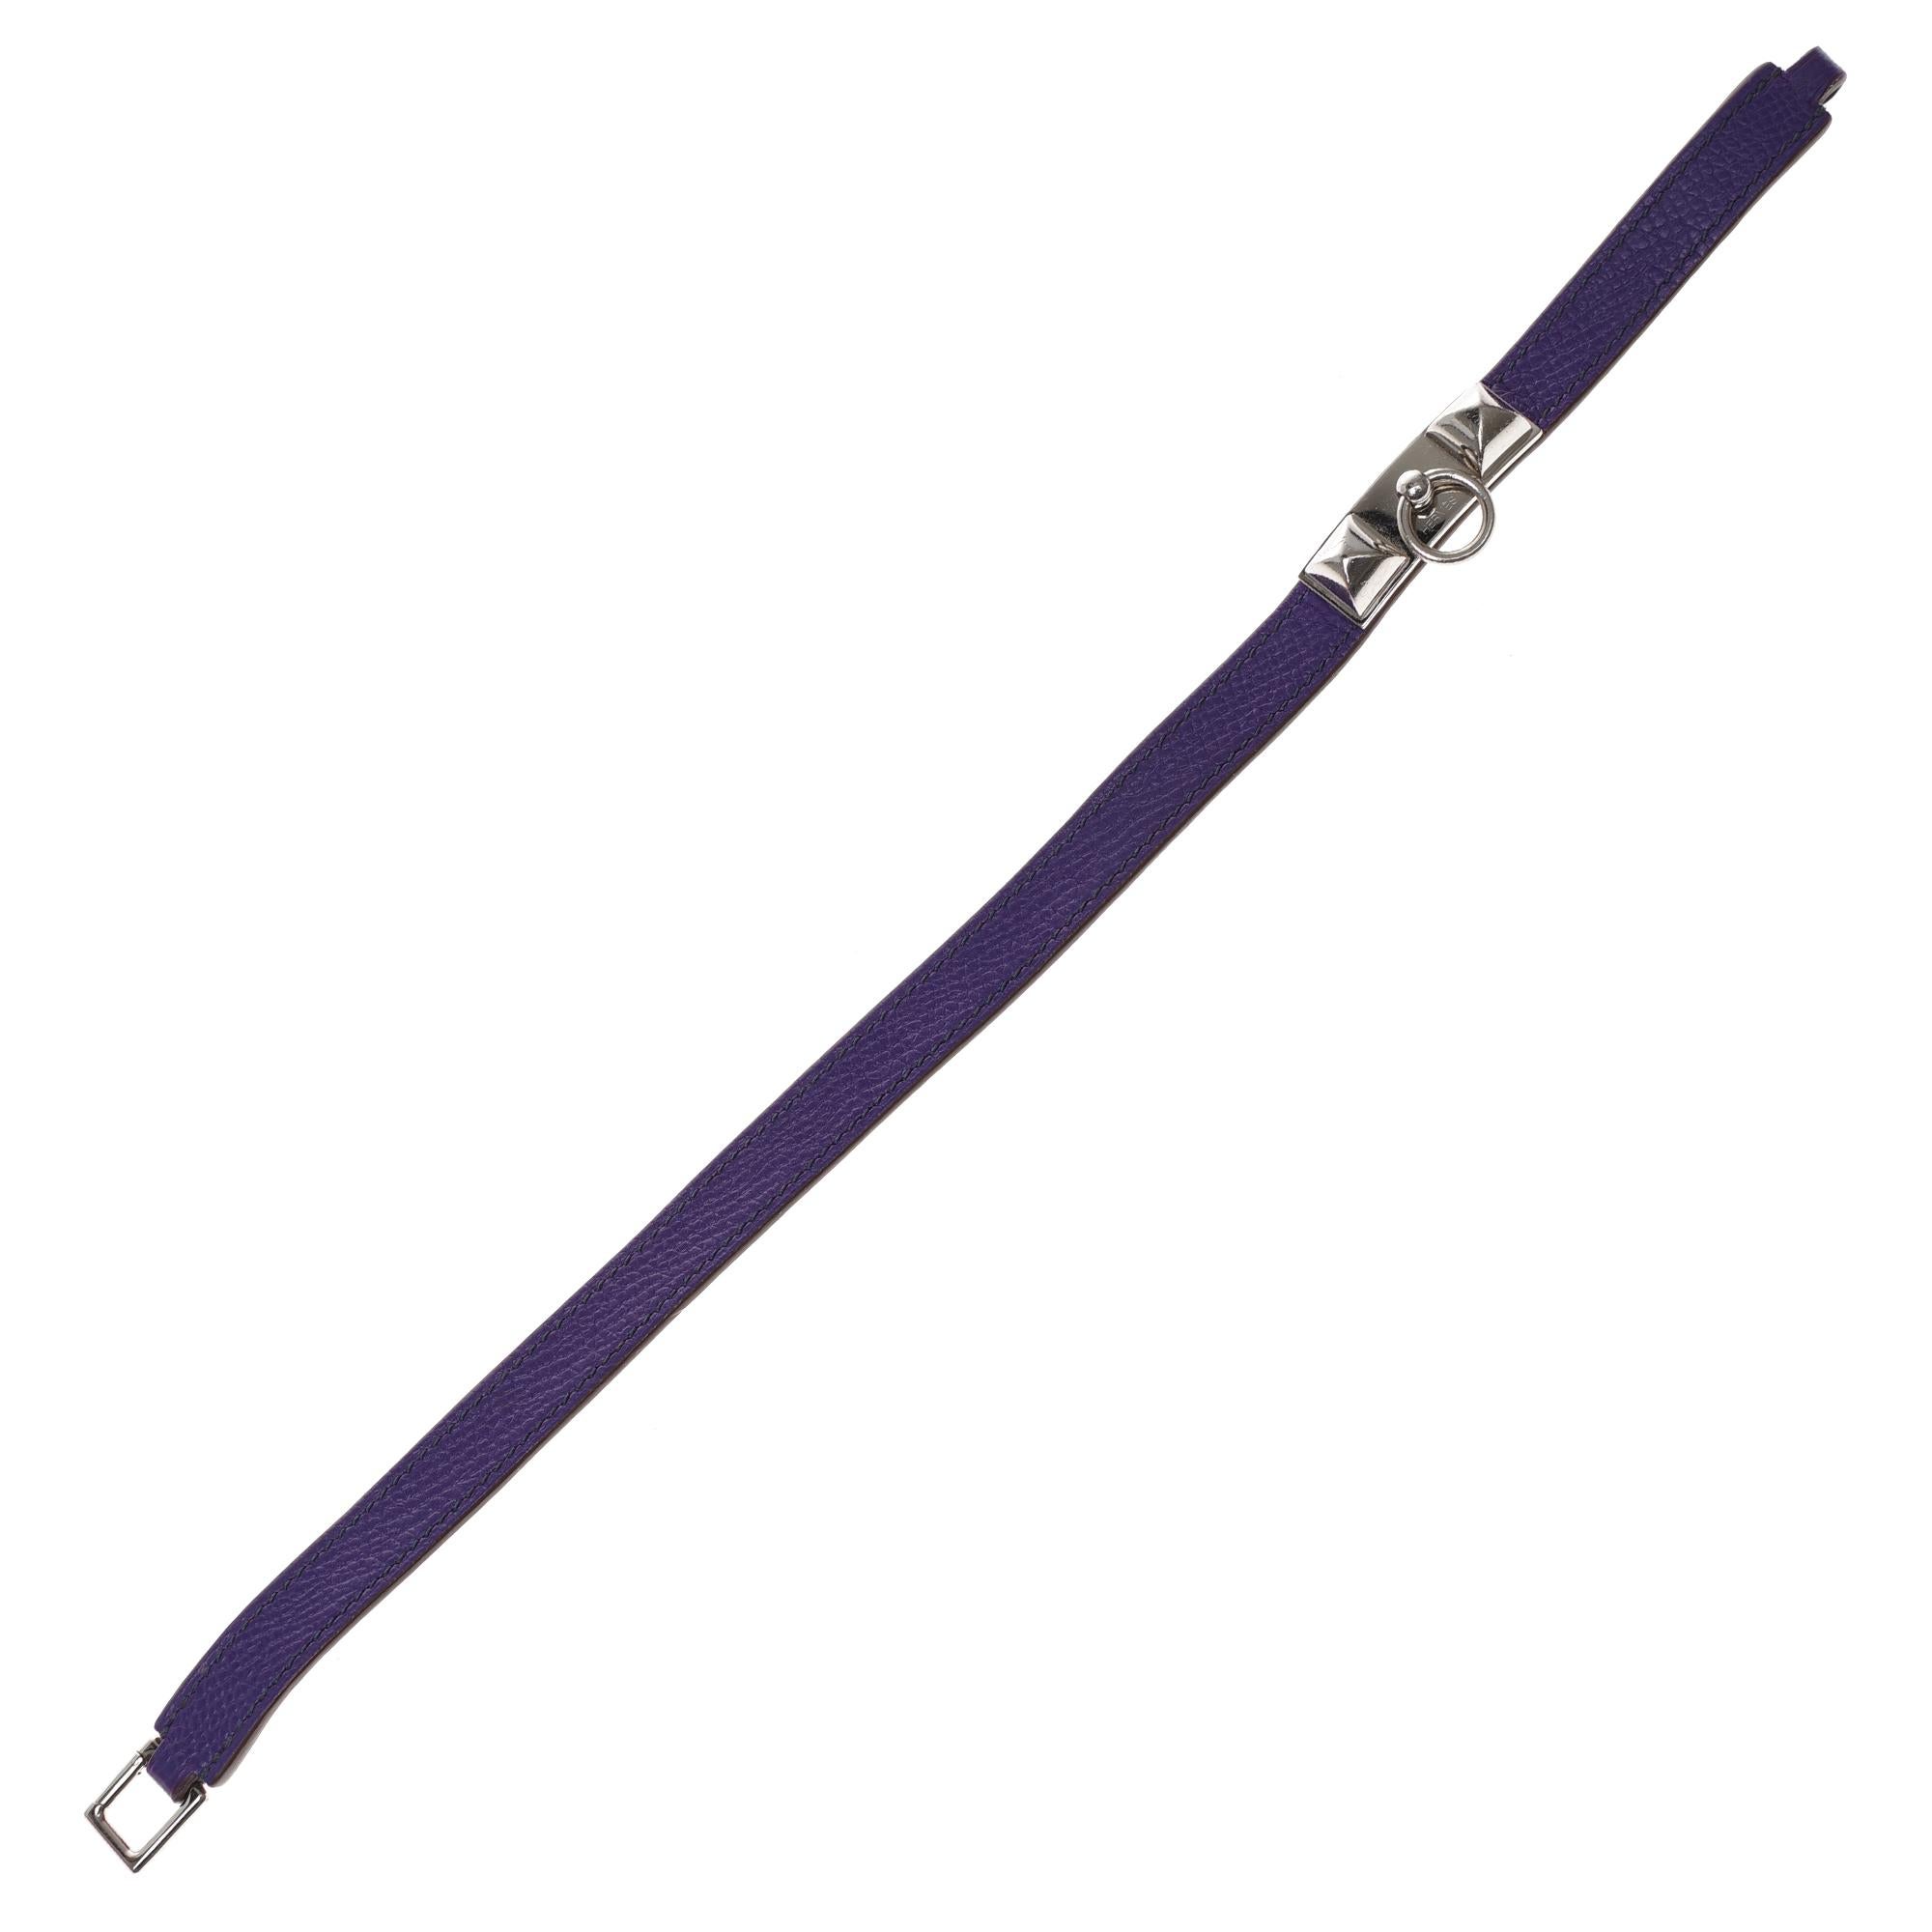 Hermès Kelly double tour bracelet model in purple epsom leather, palladium silver metal trim with a turret clasp.
Length. 33 cm
Width: 1,2 cm
Box, ribbon and pouch.

In very good condition despite slight scratches on the hardware.